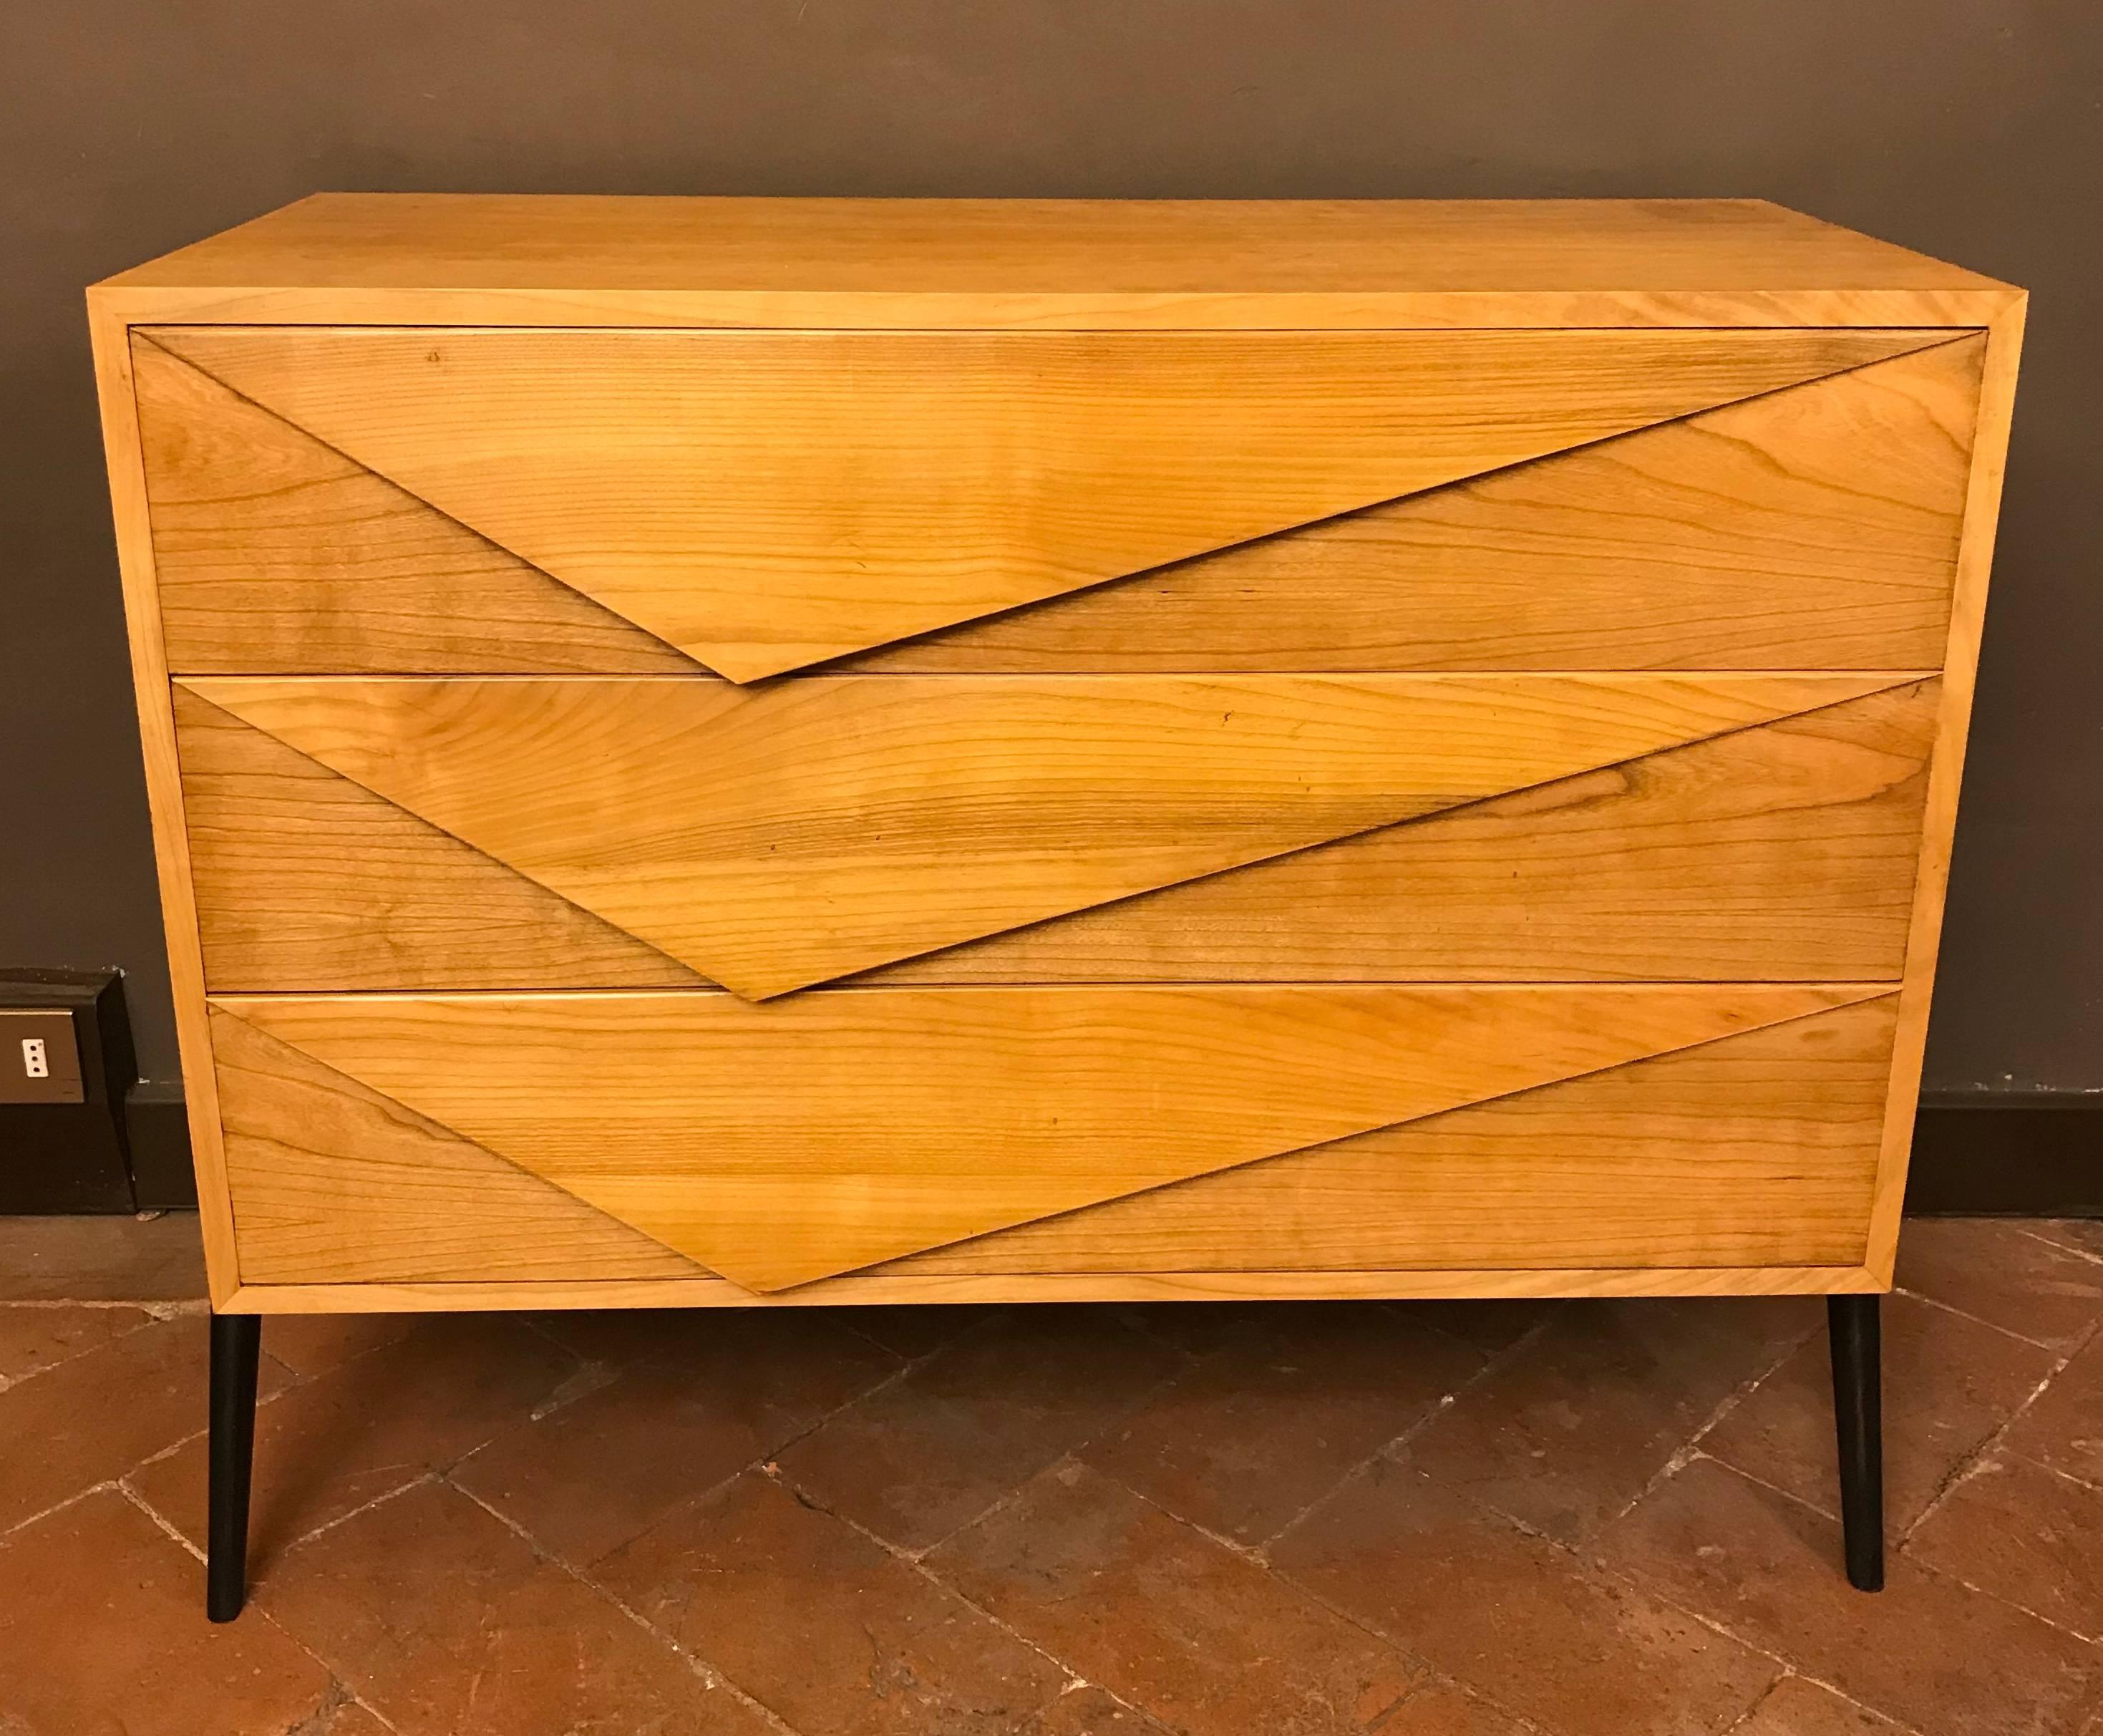 The pair has the left chest and the right one. External drawer size: 96 x 17.5 H cm. Internal drawer size: 93 x 16 H cm. The drawer plate is of massive cherrywood. Dyed dark wood legs.